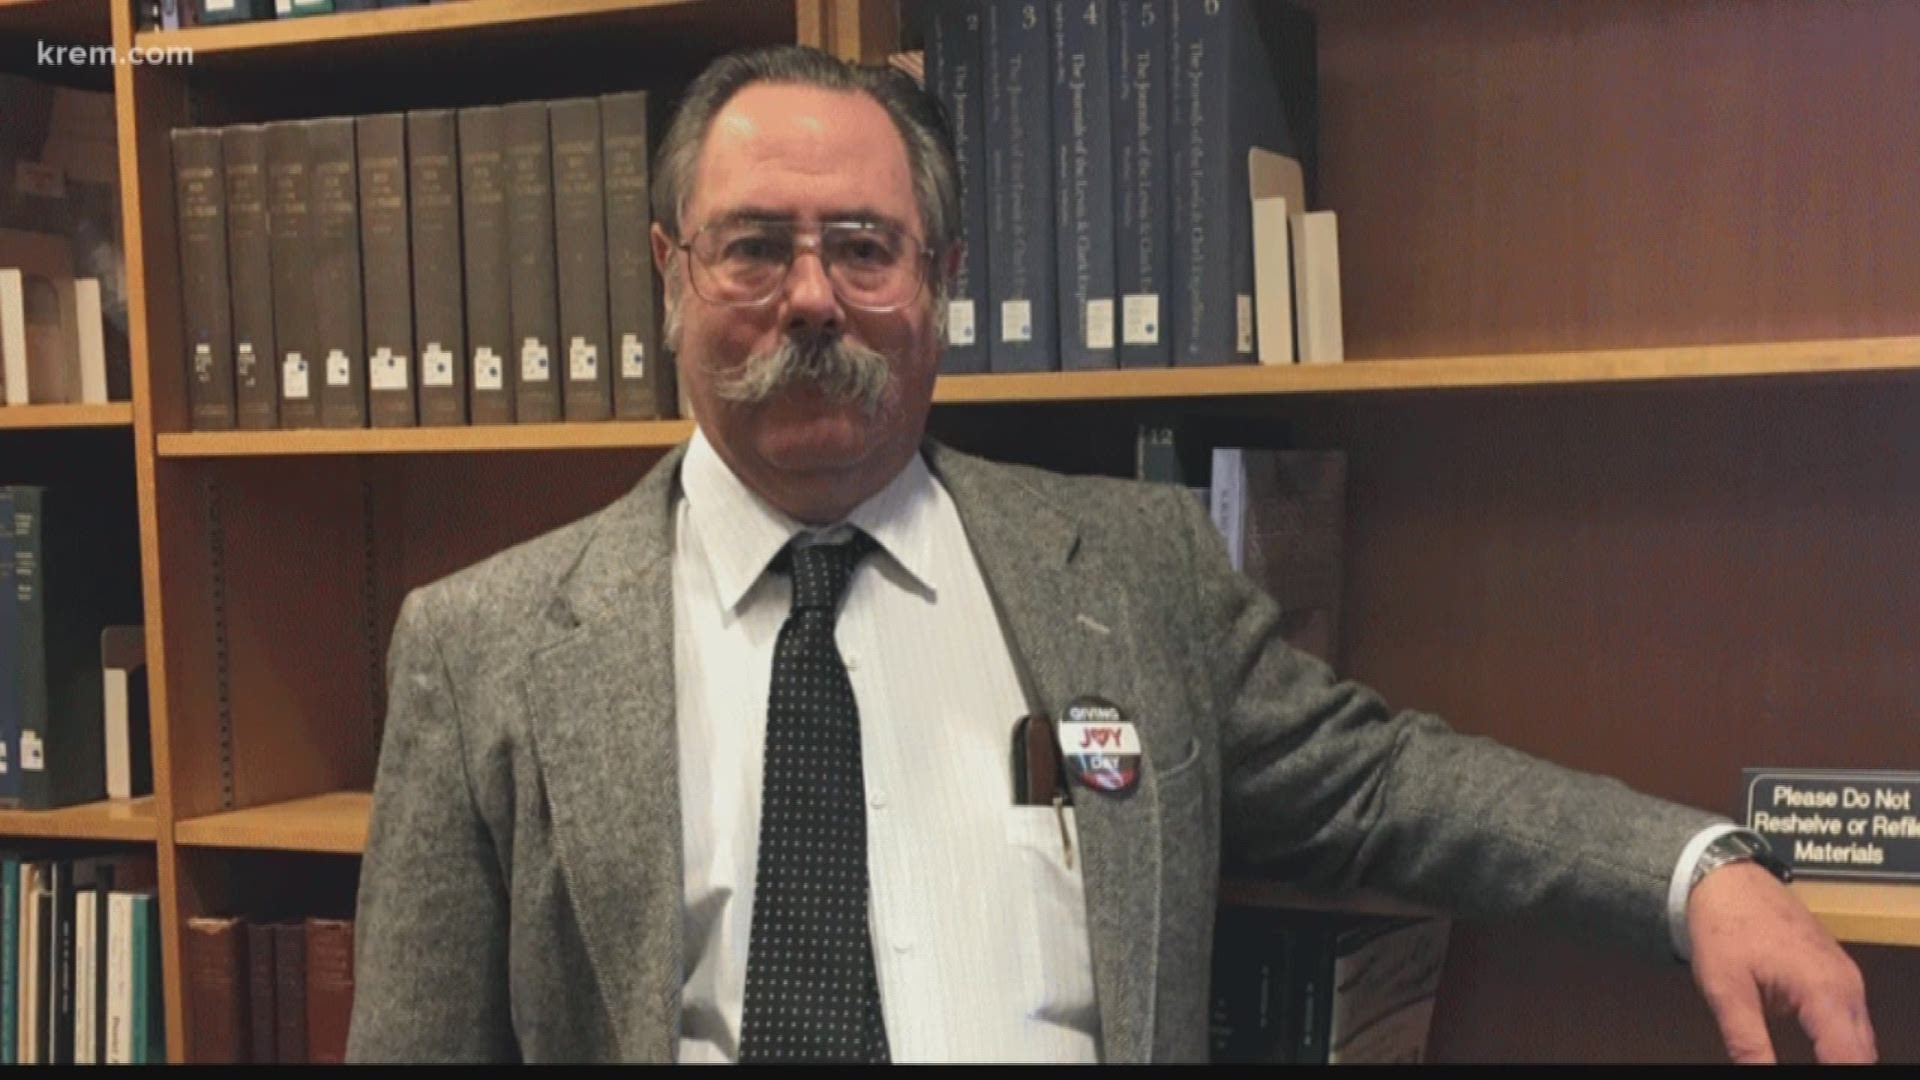 KREM Reporter Alexa Block spoke with members of the Eastern Washington University after they lost one of their own, Interim Dean of Libraries Charles Mutschler.